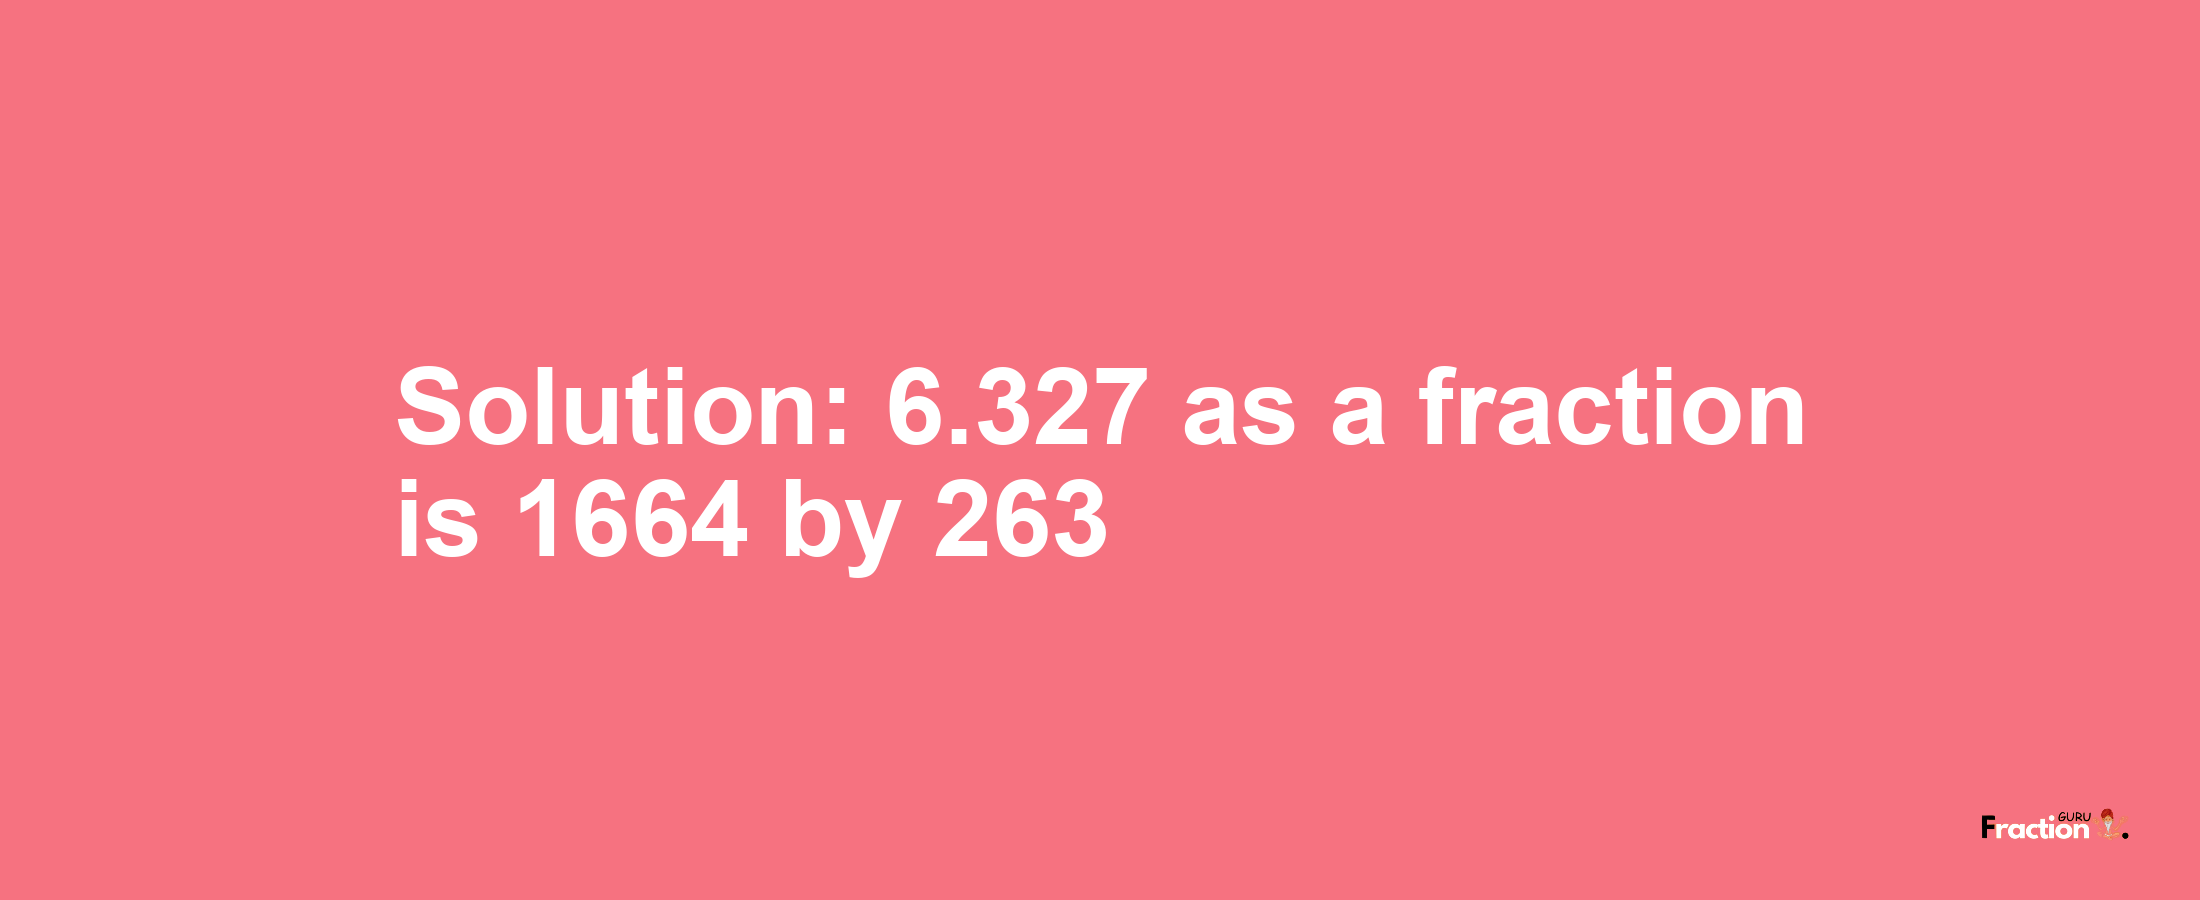 Solution:6.327 as a fraction is 1664/263